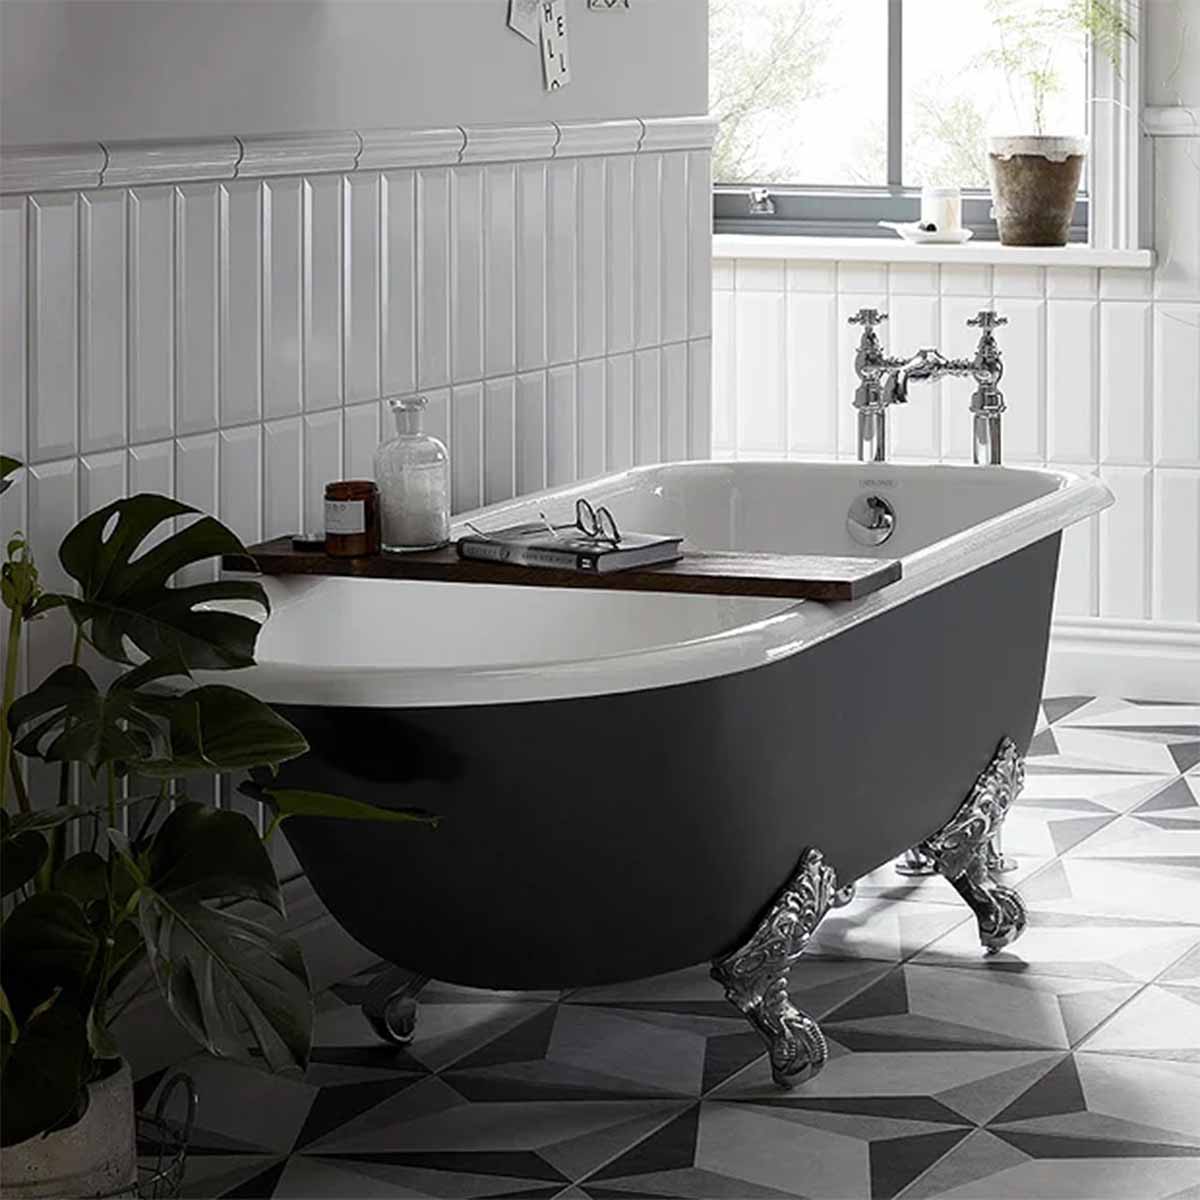 Heritage Essex Single Ended Cast Iron Freestanding Bath 1700x700mm